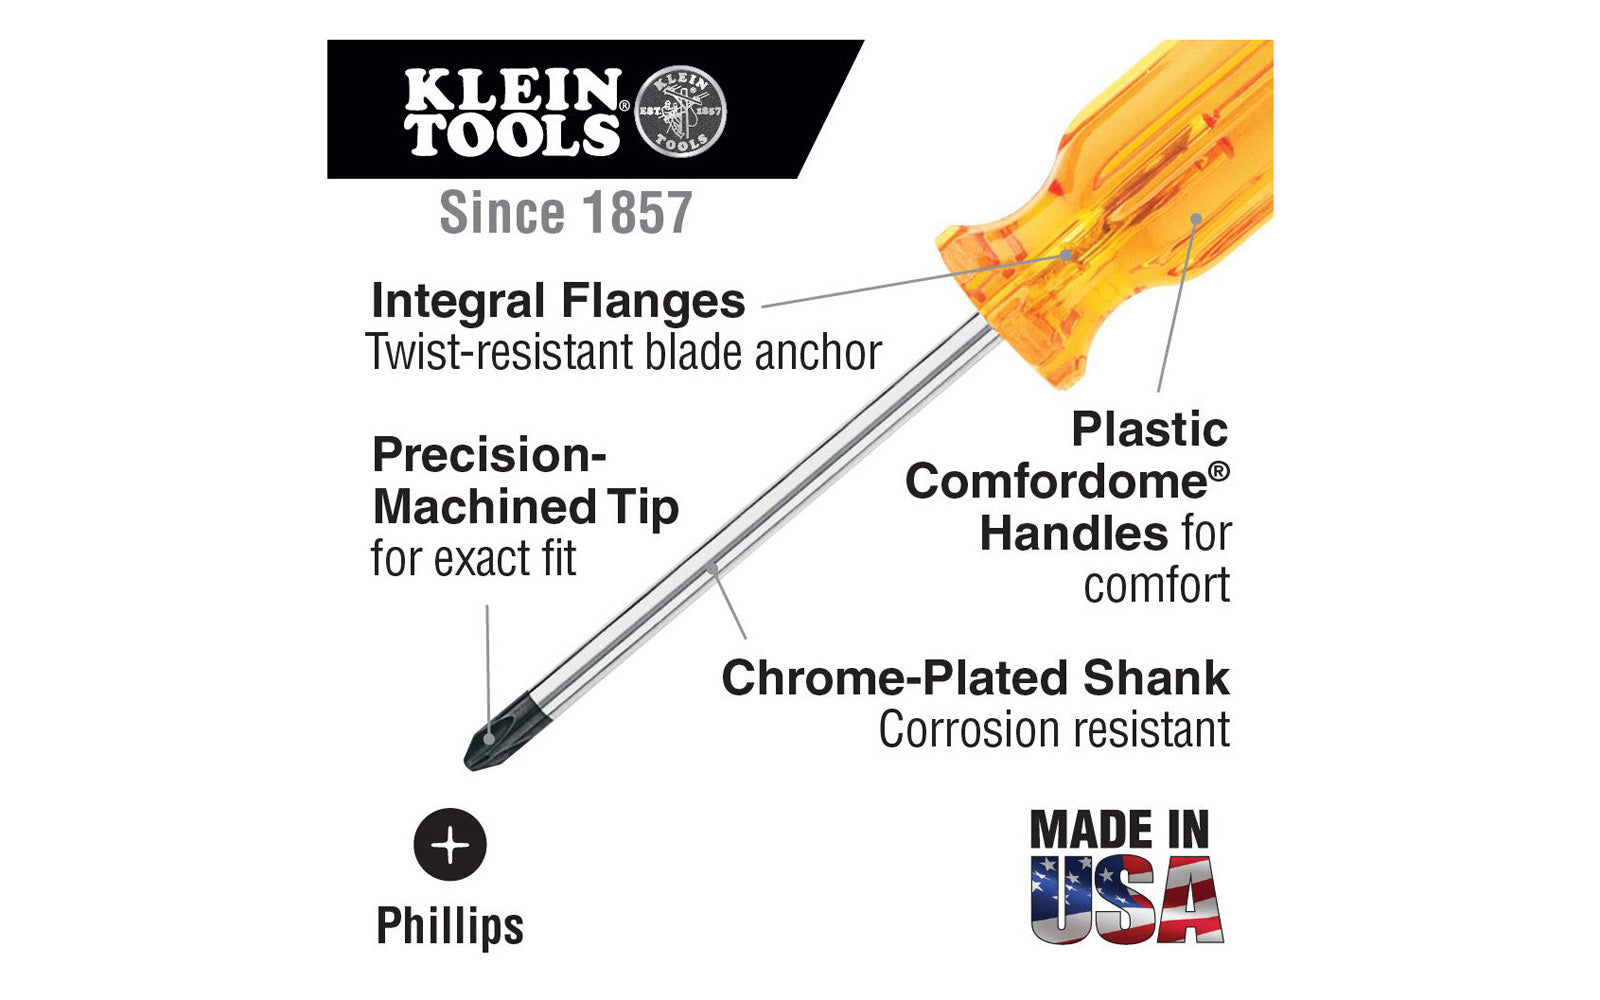 Vaco Profilated #2 Phillips Screwdriver - 12" Blade. Precision-forged & polished blades with black tips. Long Klein Tools Phillips Screwdriver. Tough amber, smooth Comfordome handle. Chrome-plated shaft. Made in USA.